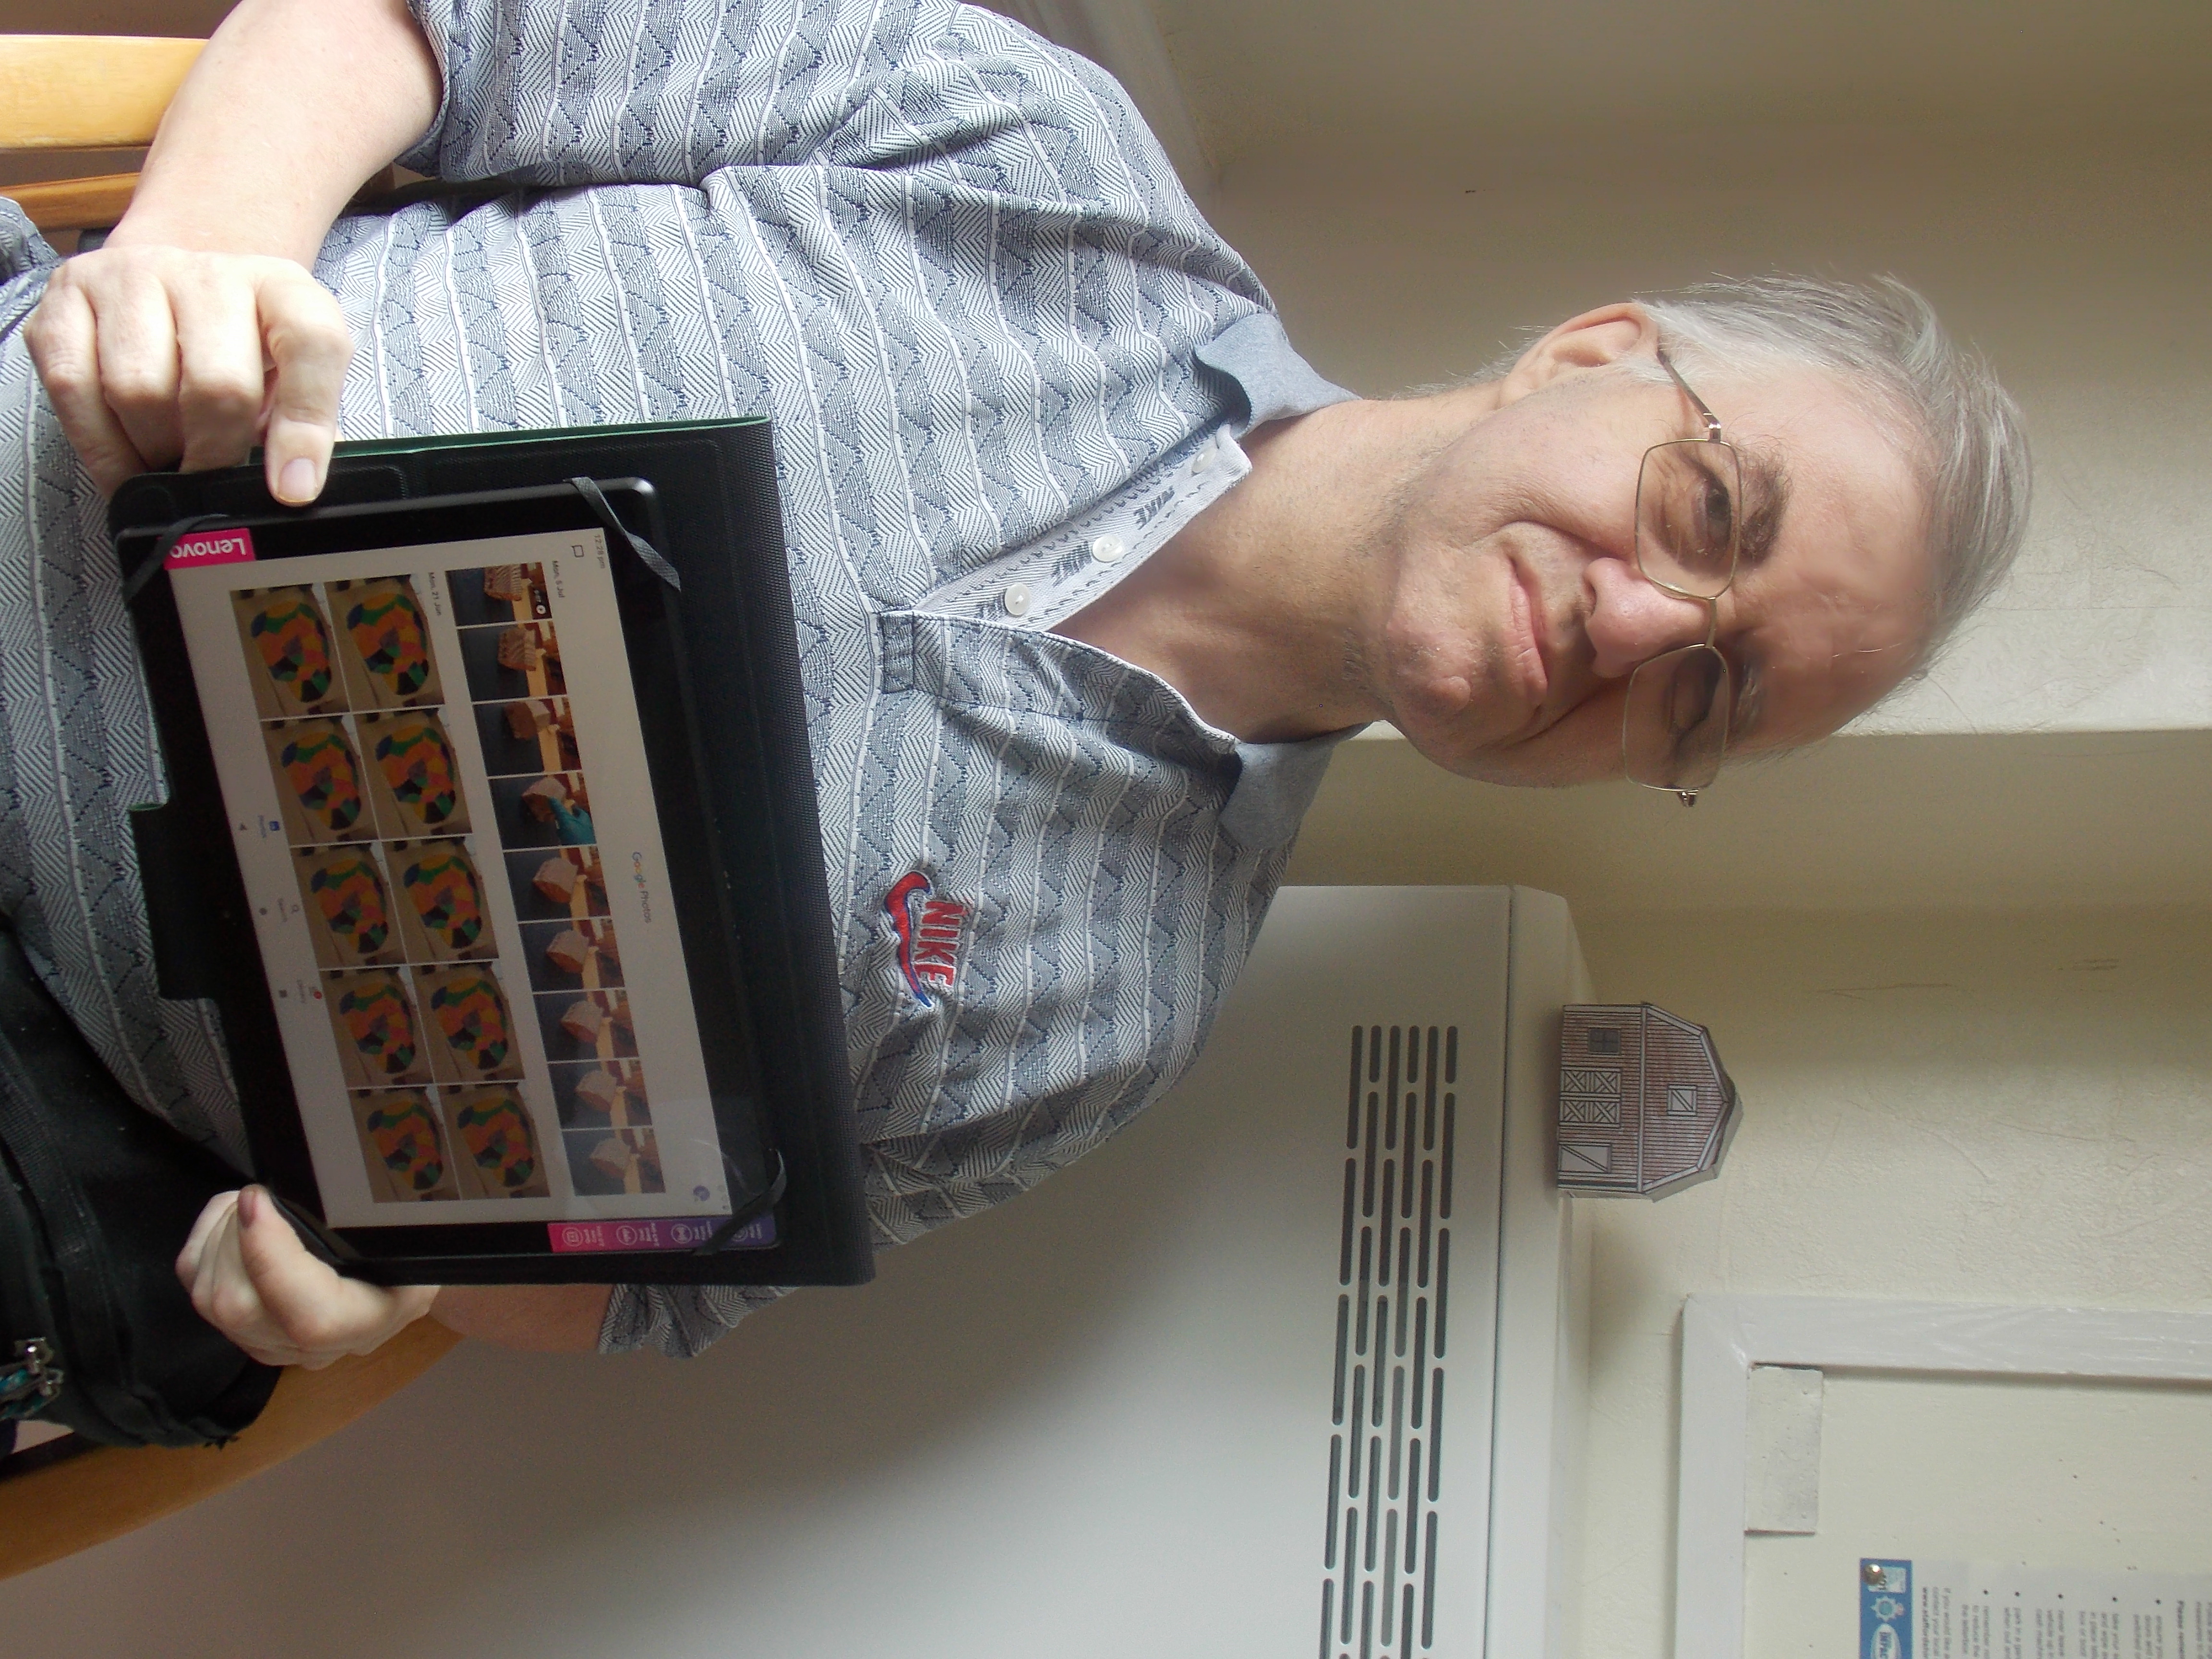 Image shows Stoke-on-trent resident with learning disabilities holding a tablet with pictures of his artwork